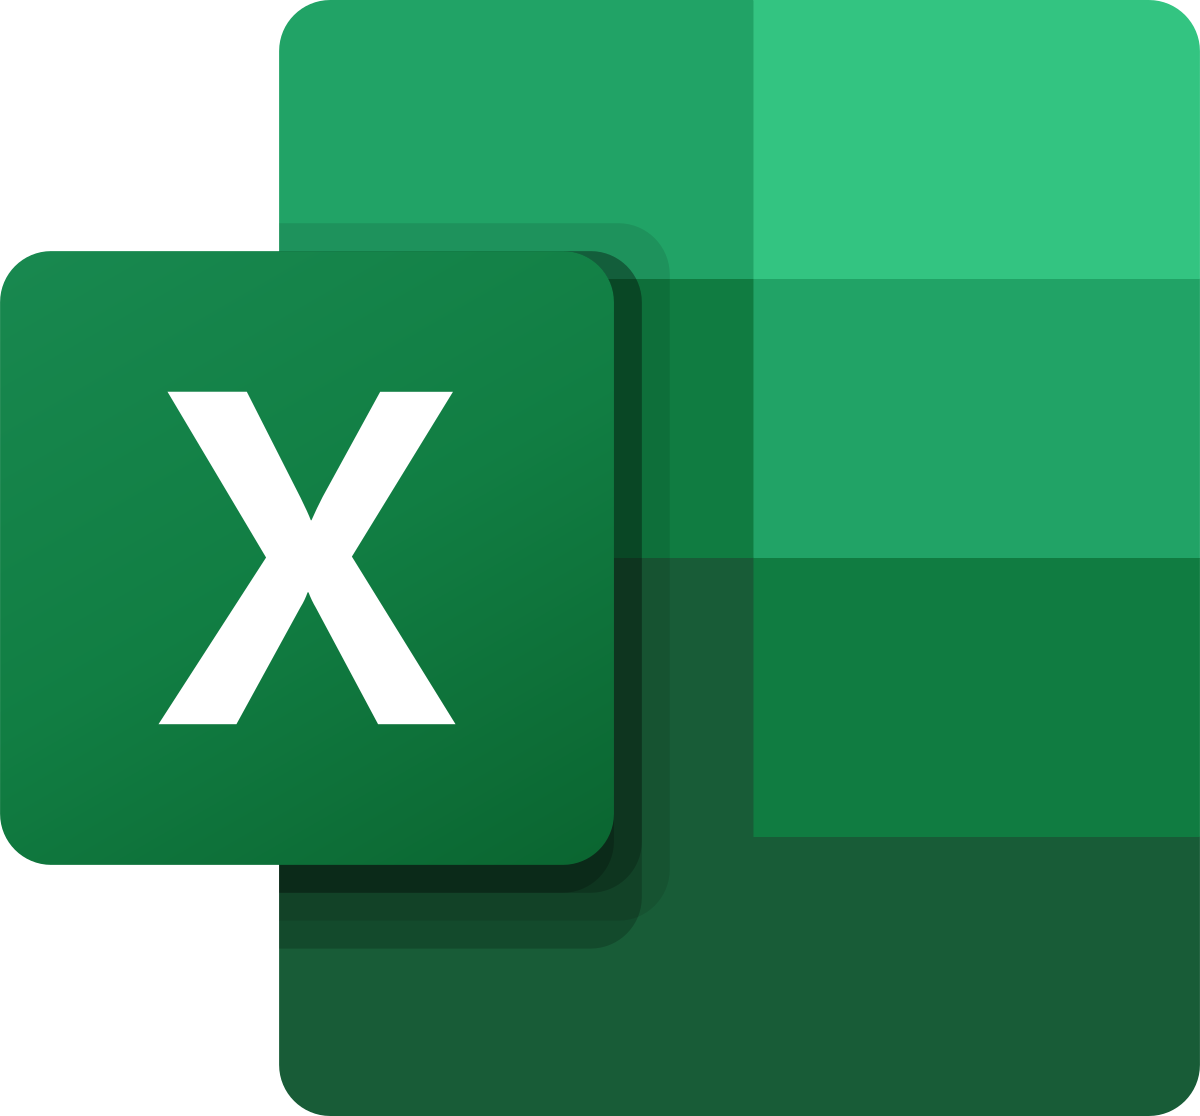 Microsoft Excel - Spreadsheets Software